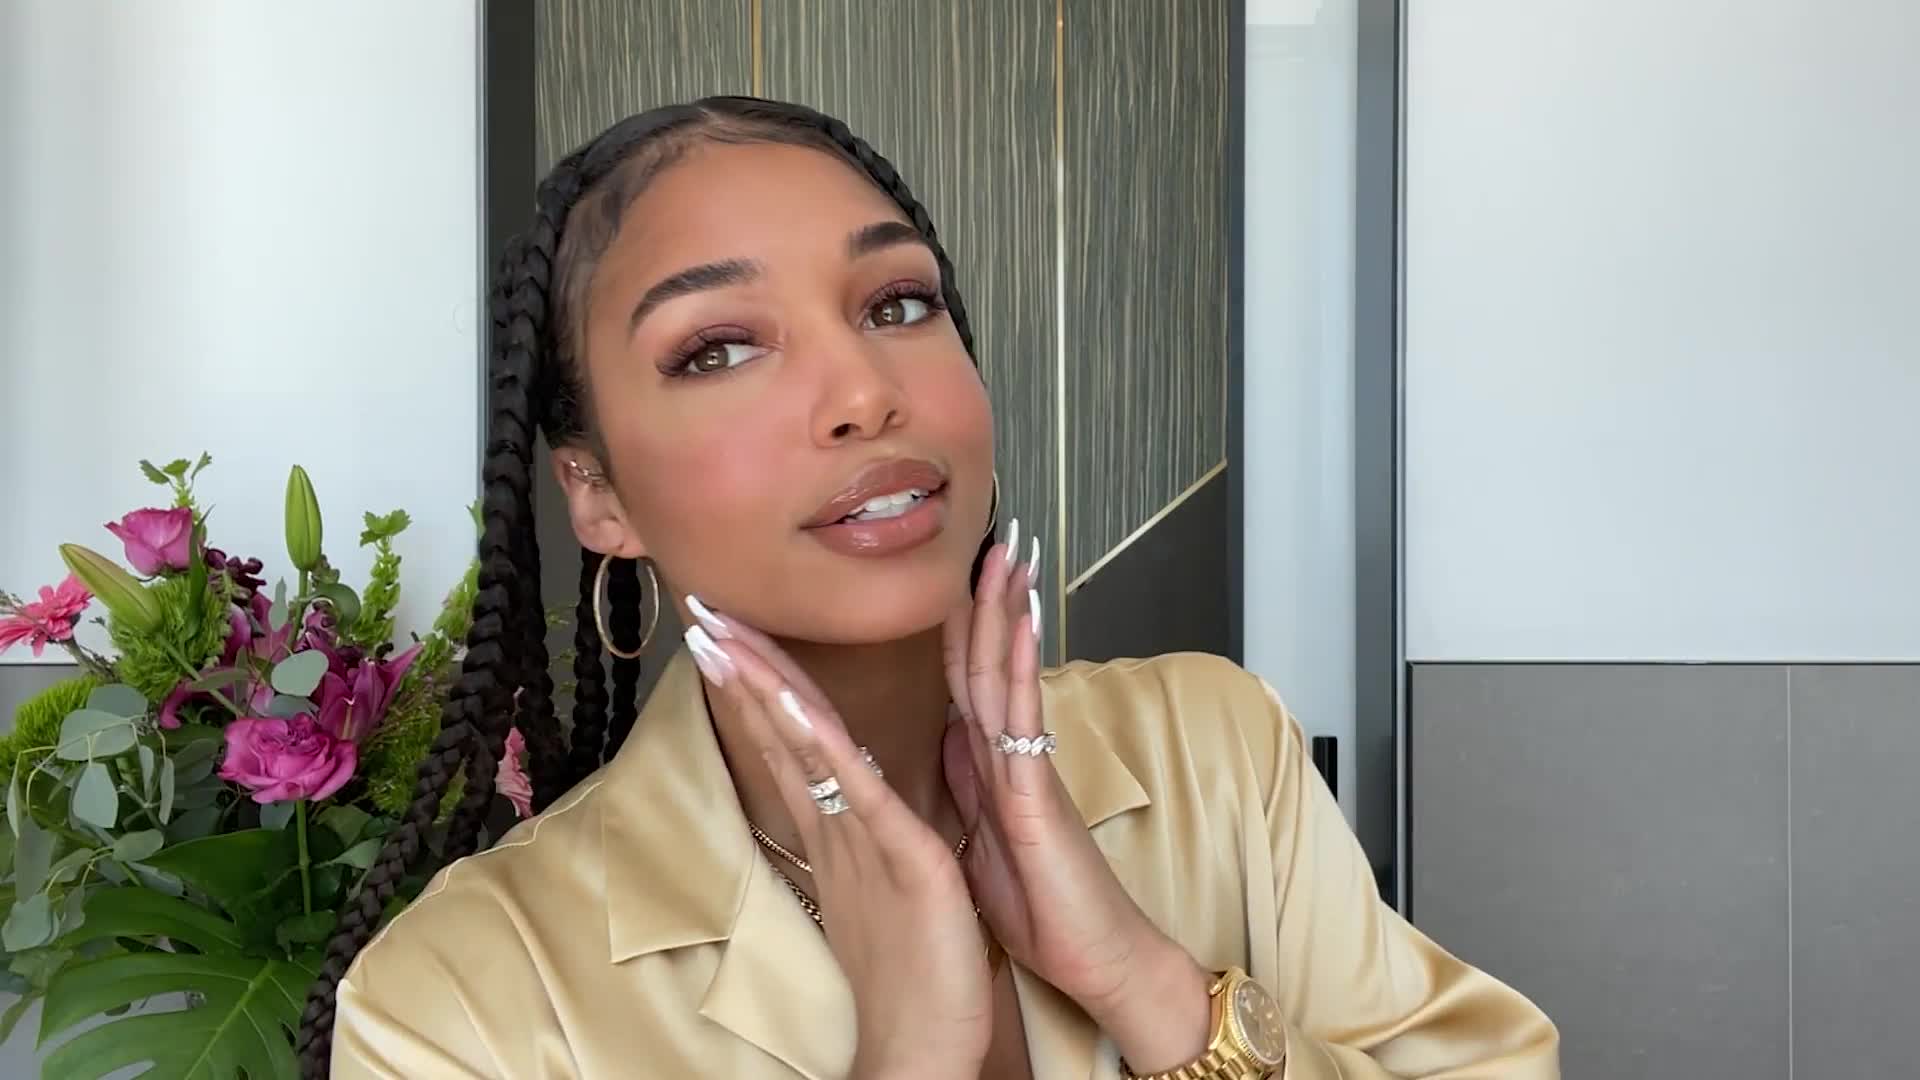 Here's why Lori Harvey should be known for more than her looks and the men  she dates